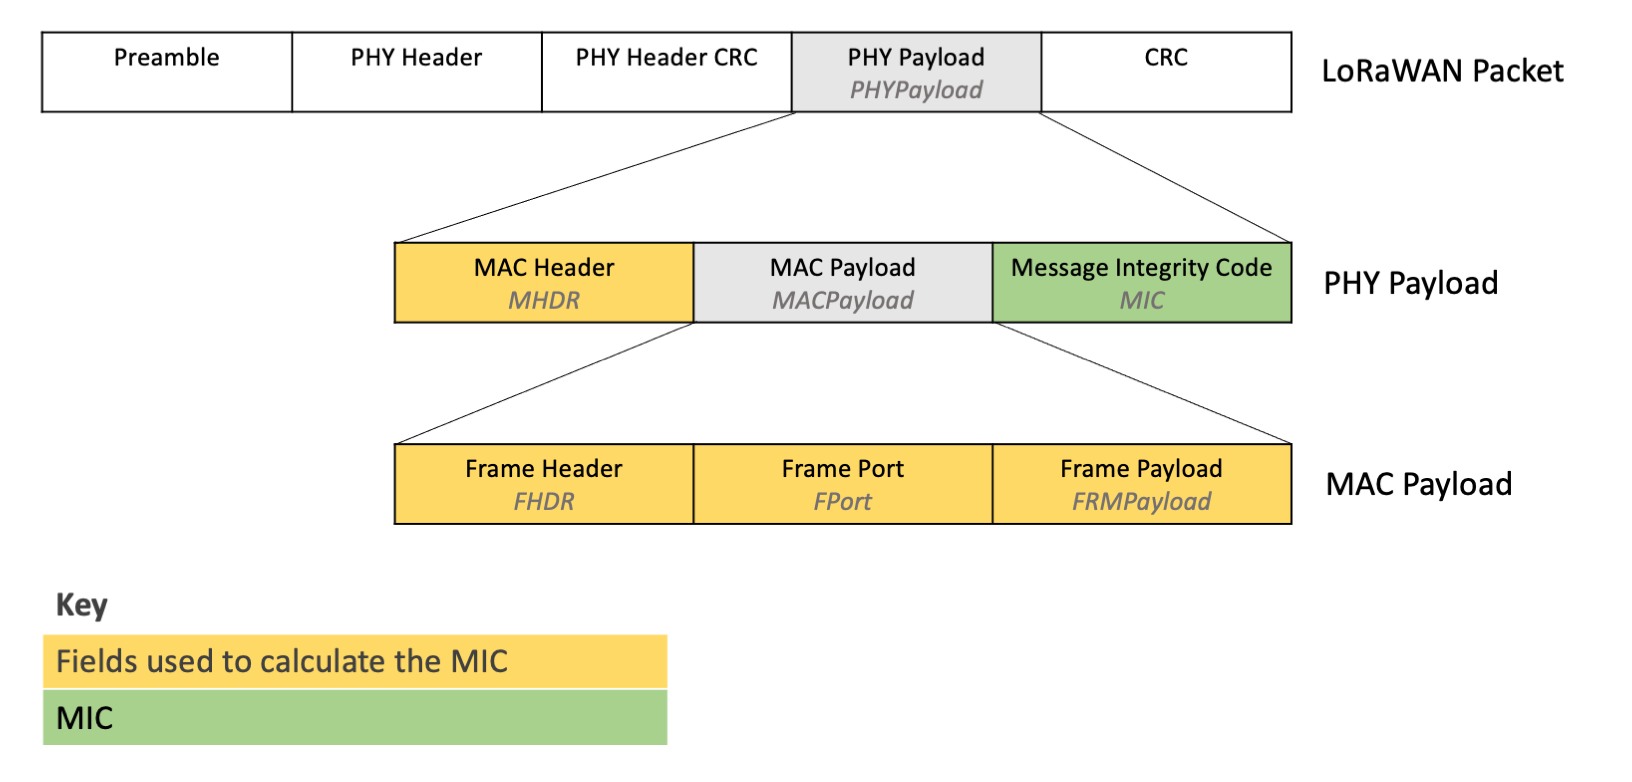 Diagram showing the **MIC** within the PHY Payload, and the fields used to calculate the **MIC** within the MAC Payload